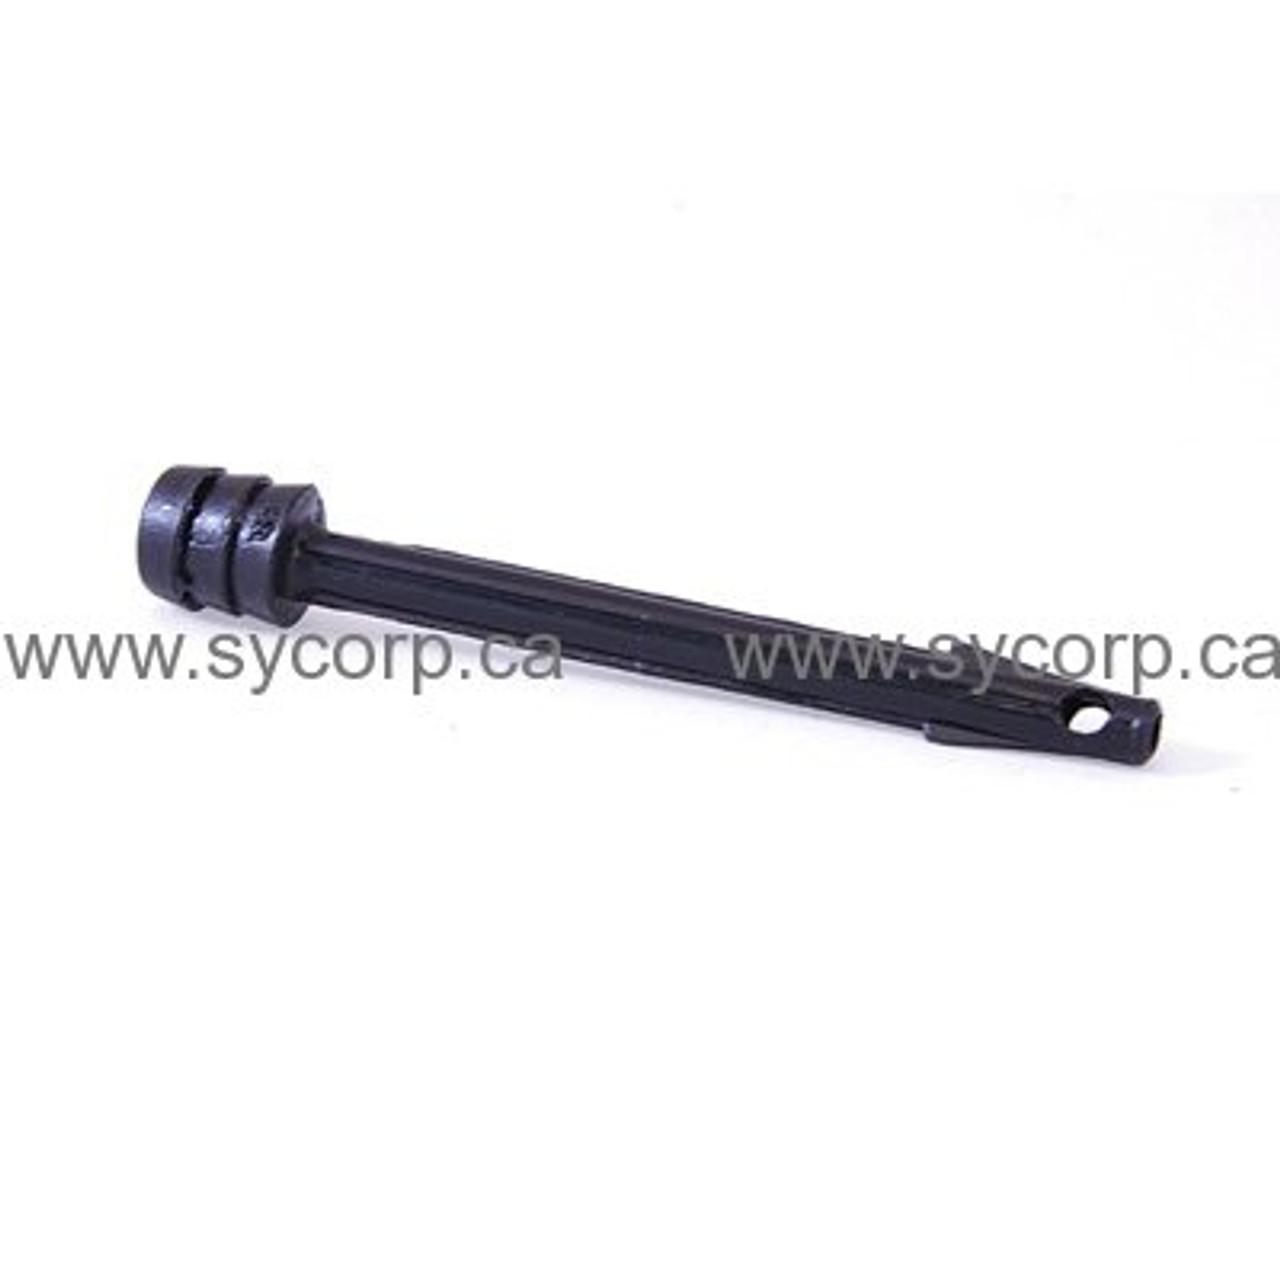 Part: Black Wall Injector 3/16"